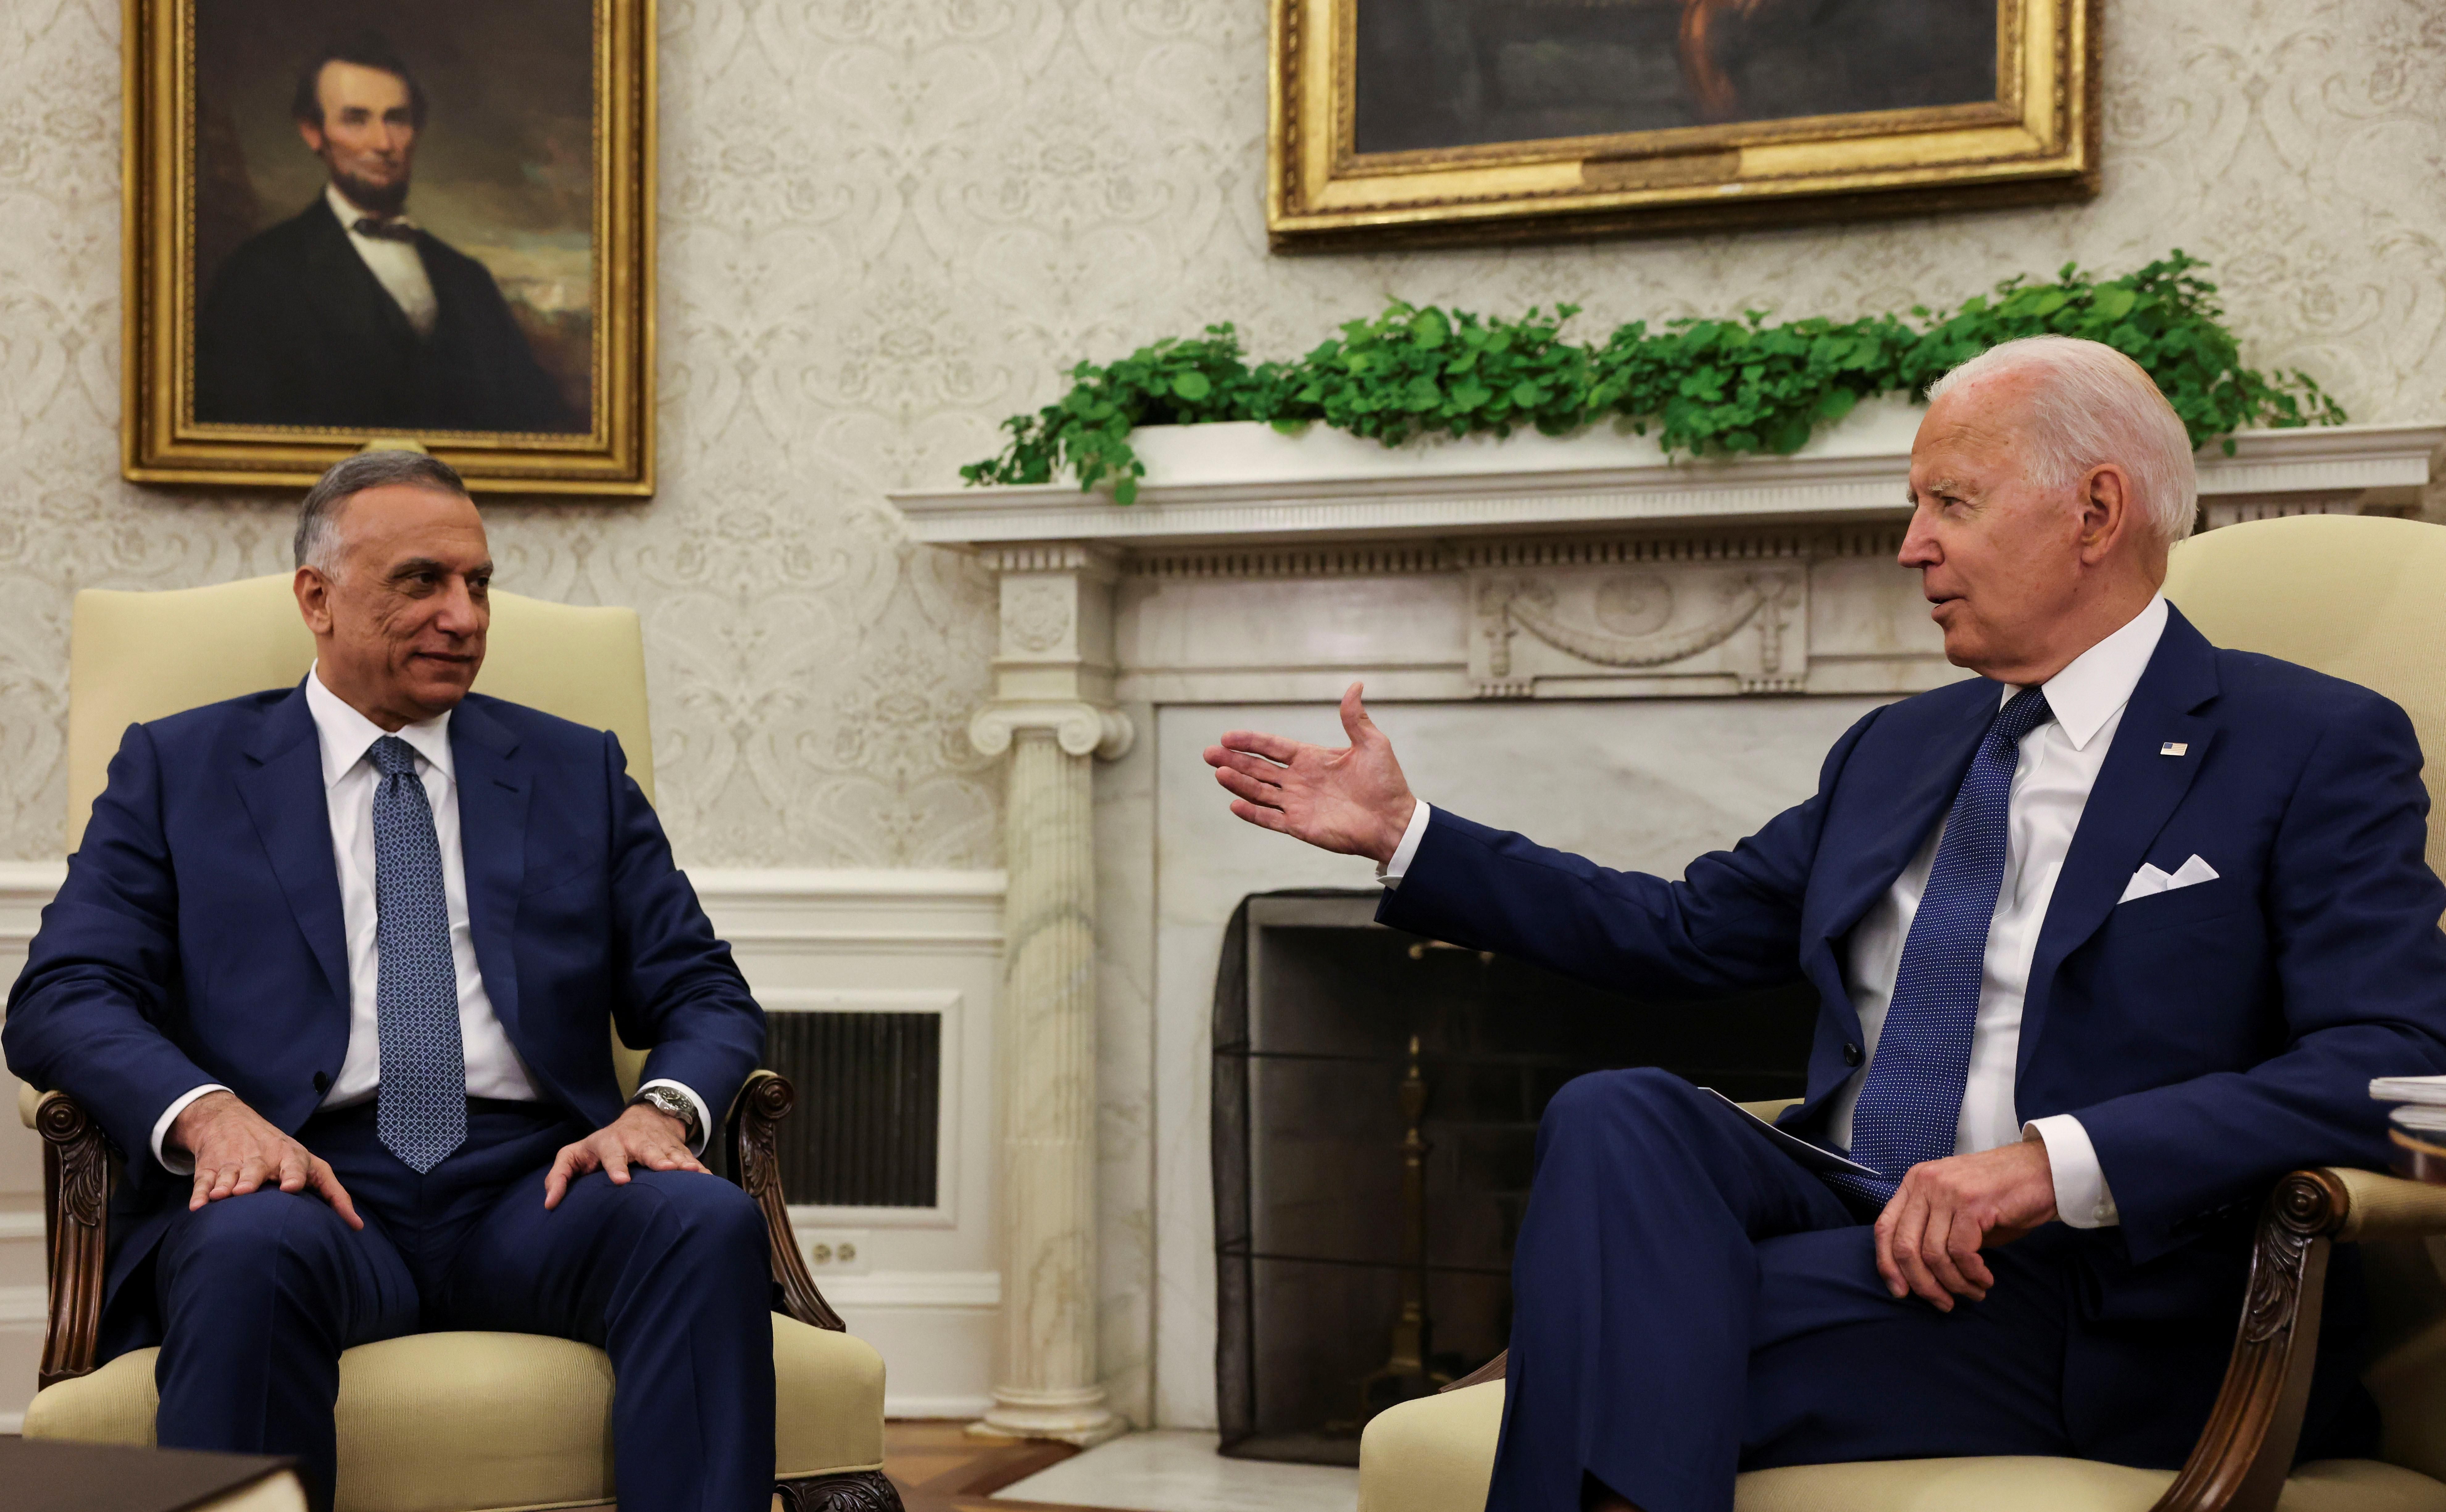 U.S. President Joe Biden SPEAKS with Iraq's Prime Minister Mustafa Al-Kadhimi during a bilateral meeting in the Oval Office at the White House in Washington, U.S., July 26, 2021.